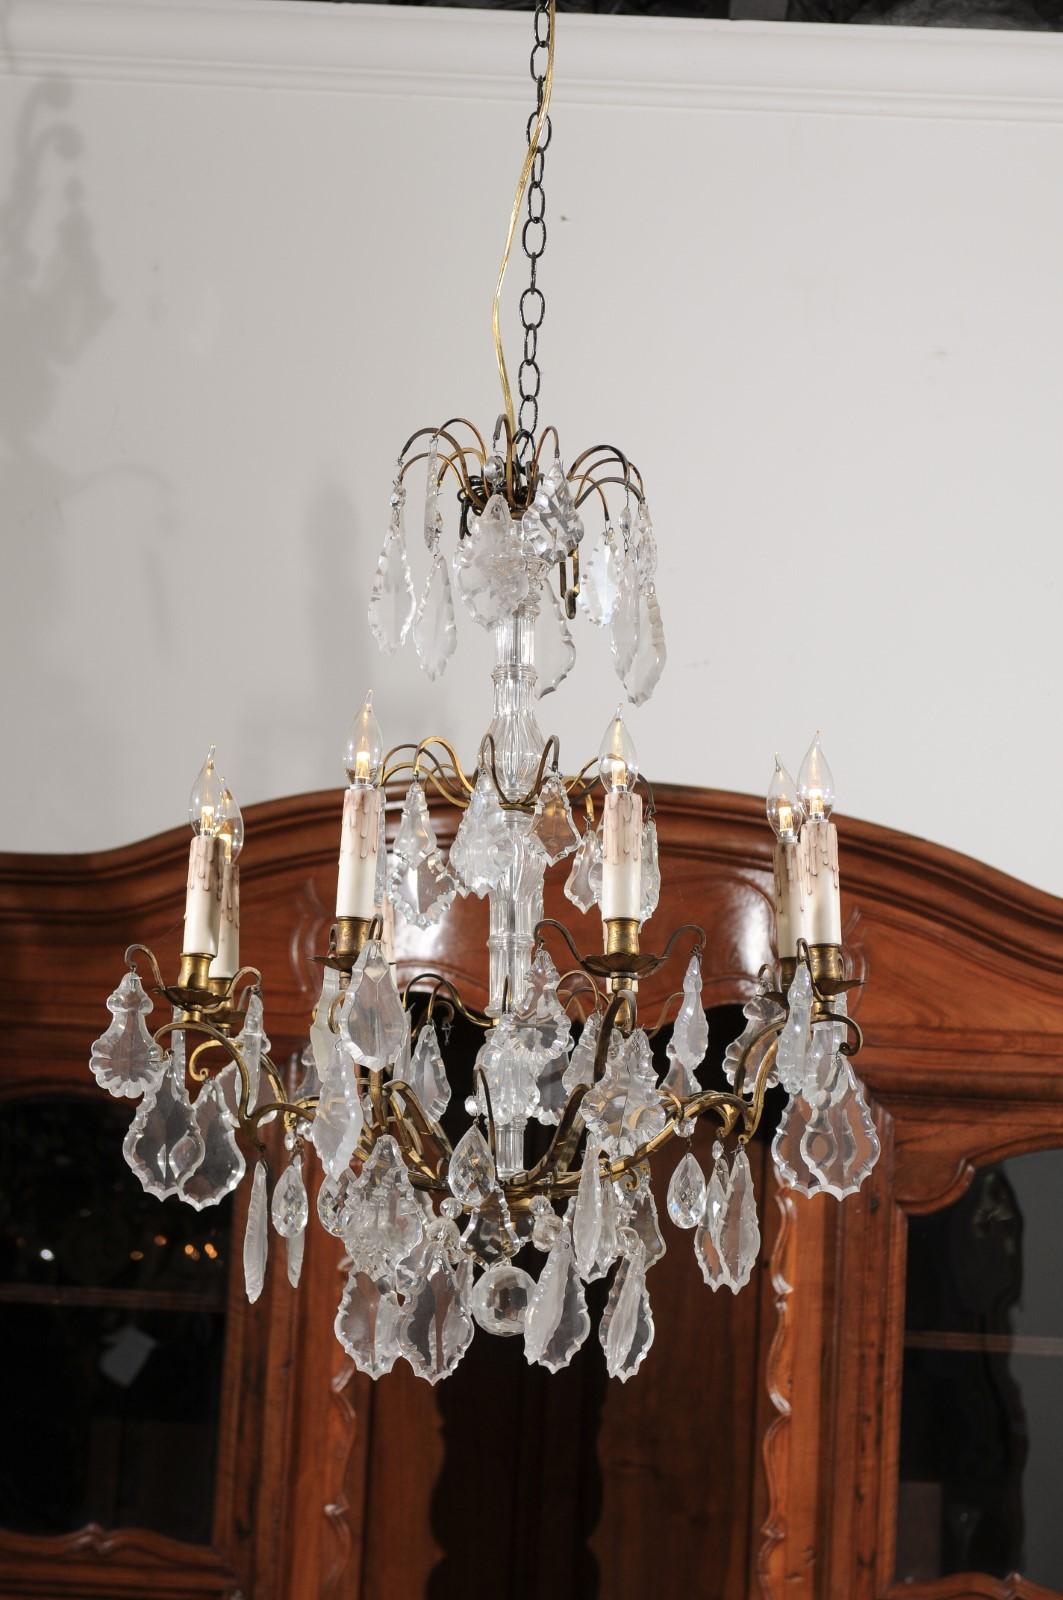 A French Napoleon III period eight-light crystal chandelier from the mid-19th century with brass armature. Born in France during the reign of Emperor Napoleon III's reign, this exquisite chandelier features a crystal shaft topped with scrolling